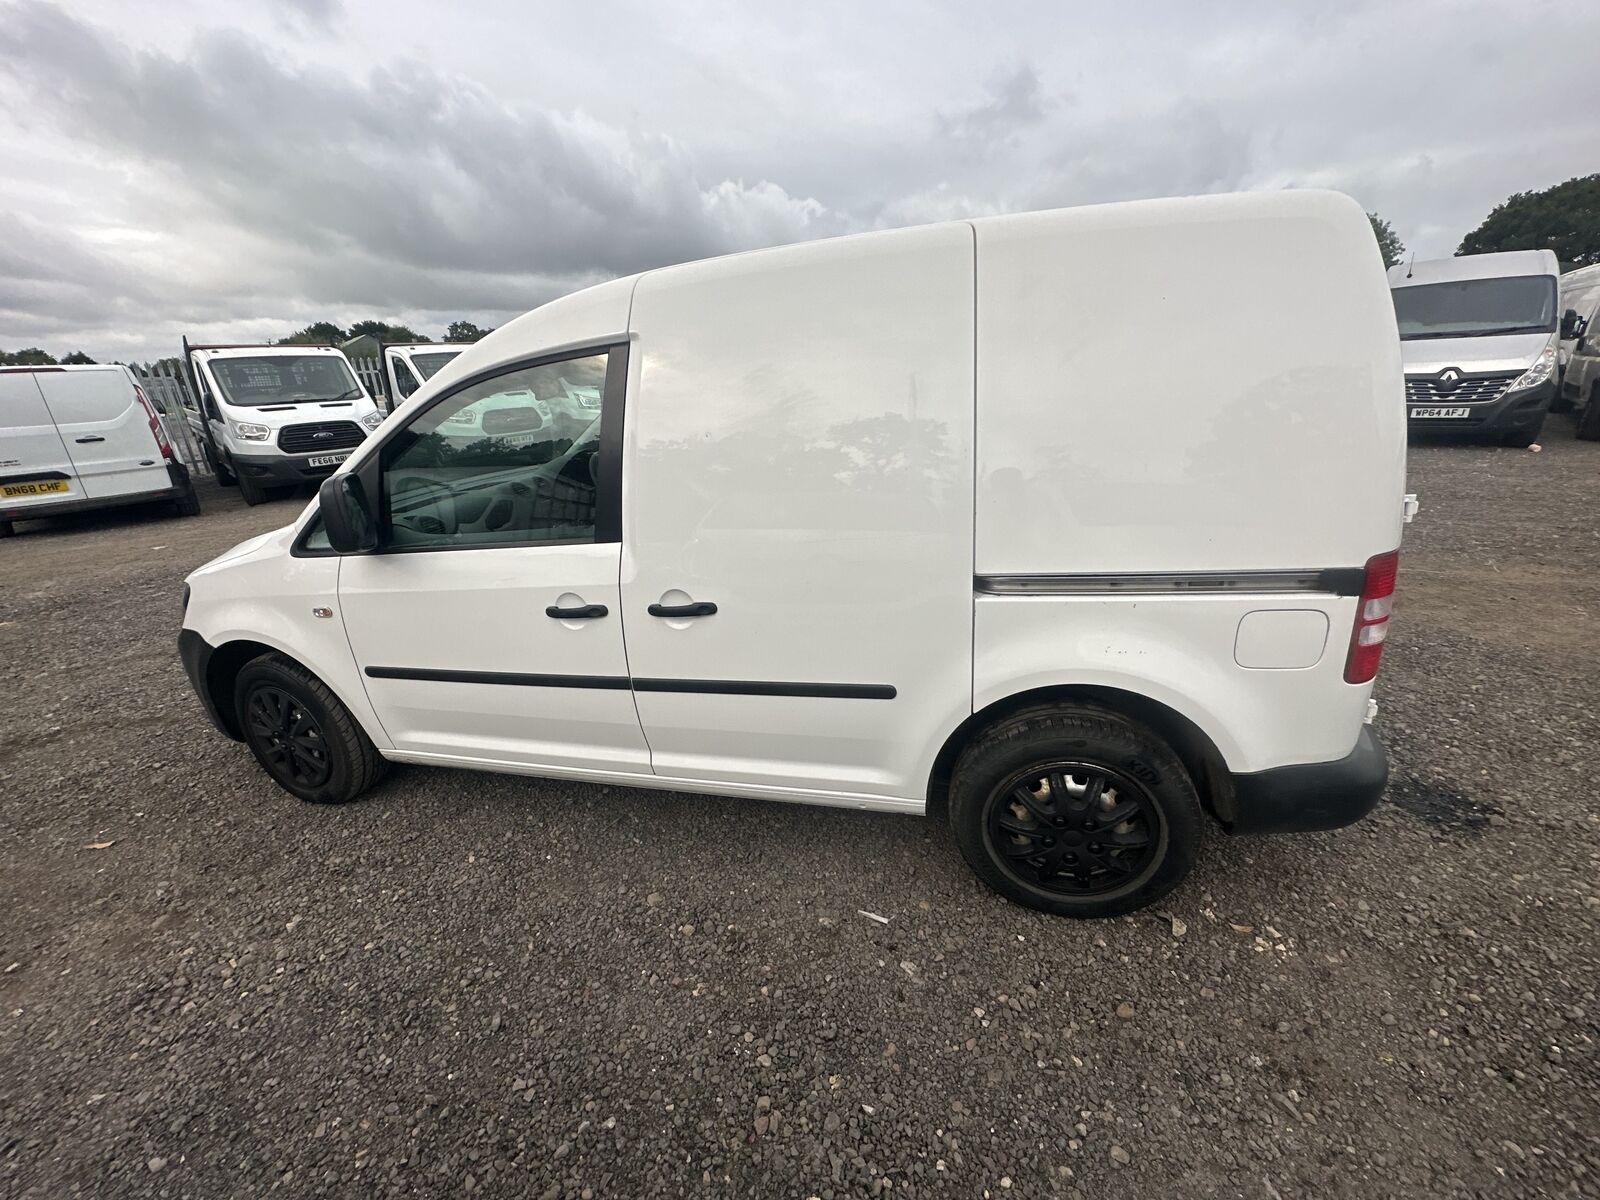 Bid on VW CADDY C20 TDI 75: WHITE PANEL VAN, READY FOR WORK (NO VAT ON HAMMER)- Buy &amp; Sell on Auction with EAMA Group